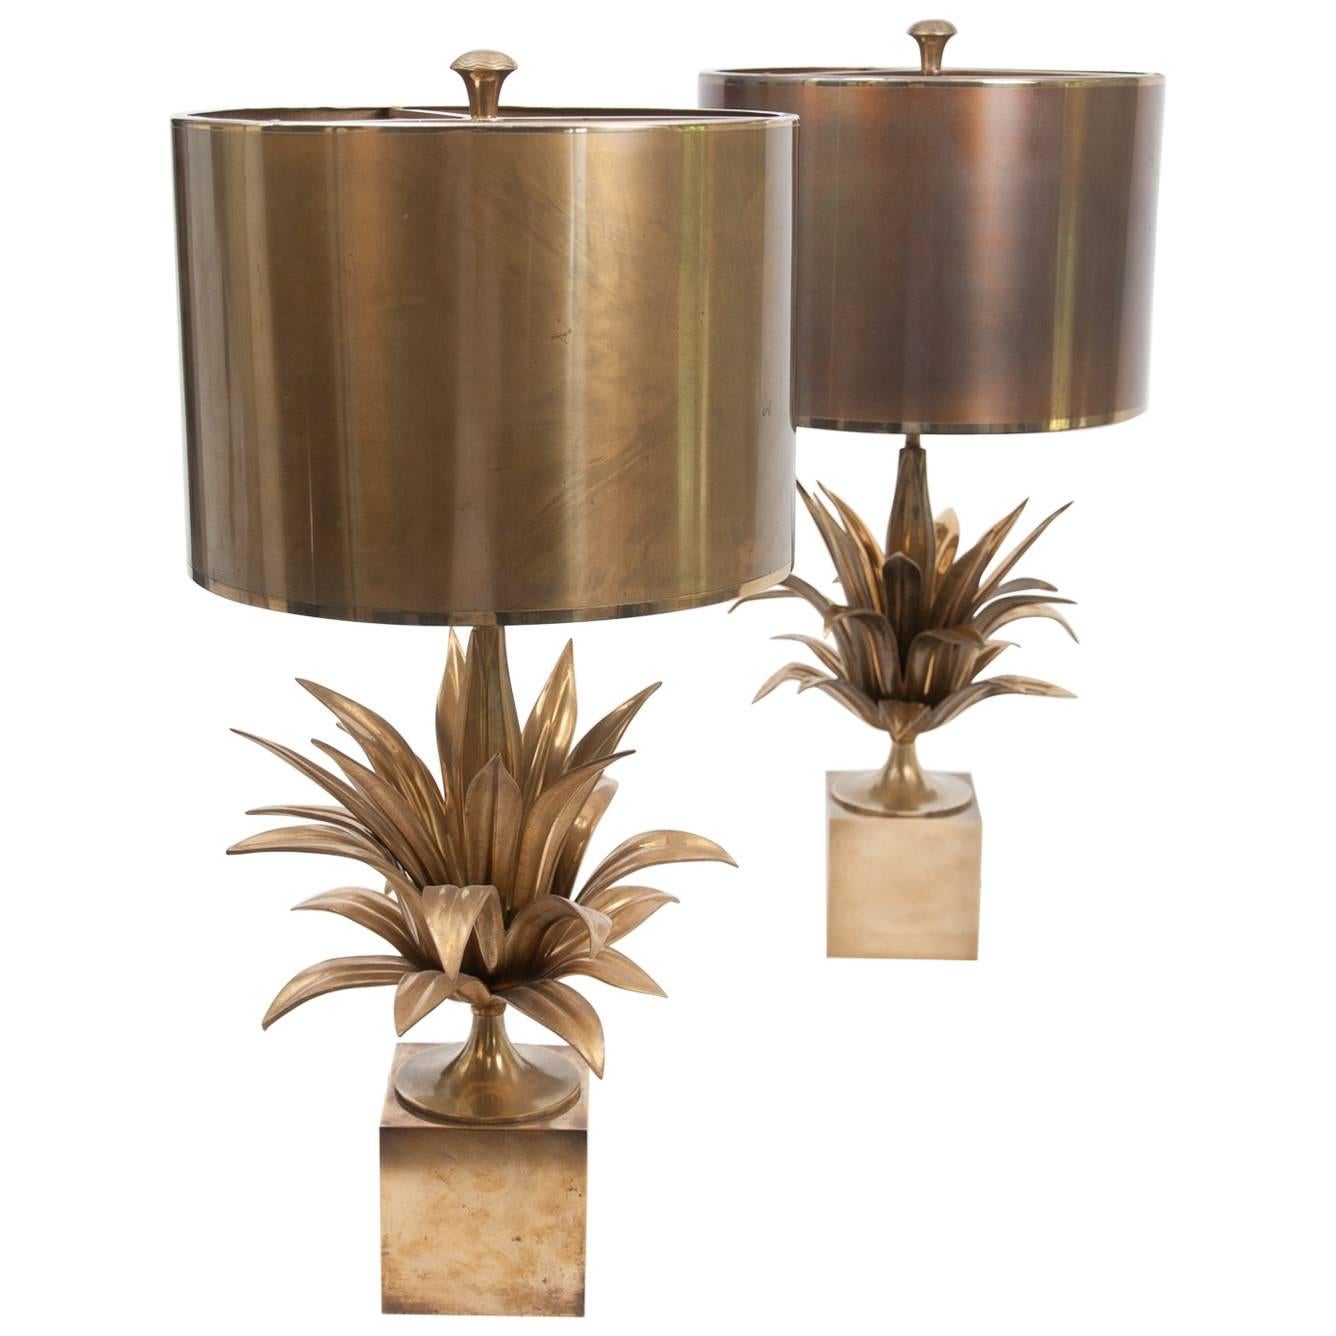 Matched Pair of “Agave a Gorge” Table Lamps by Maison Charles